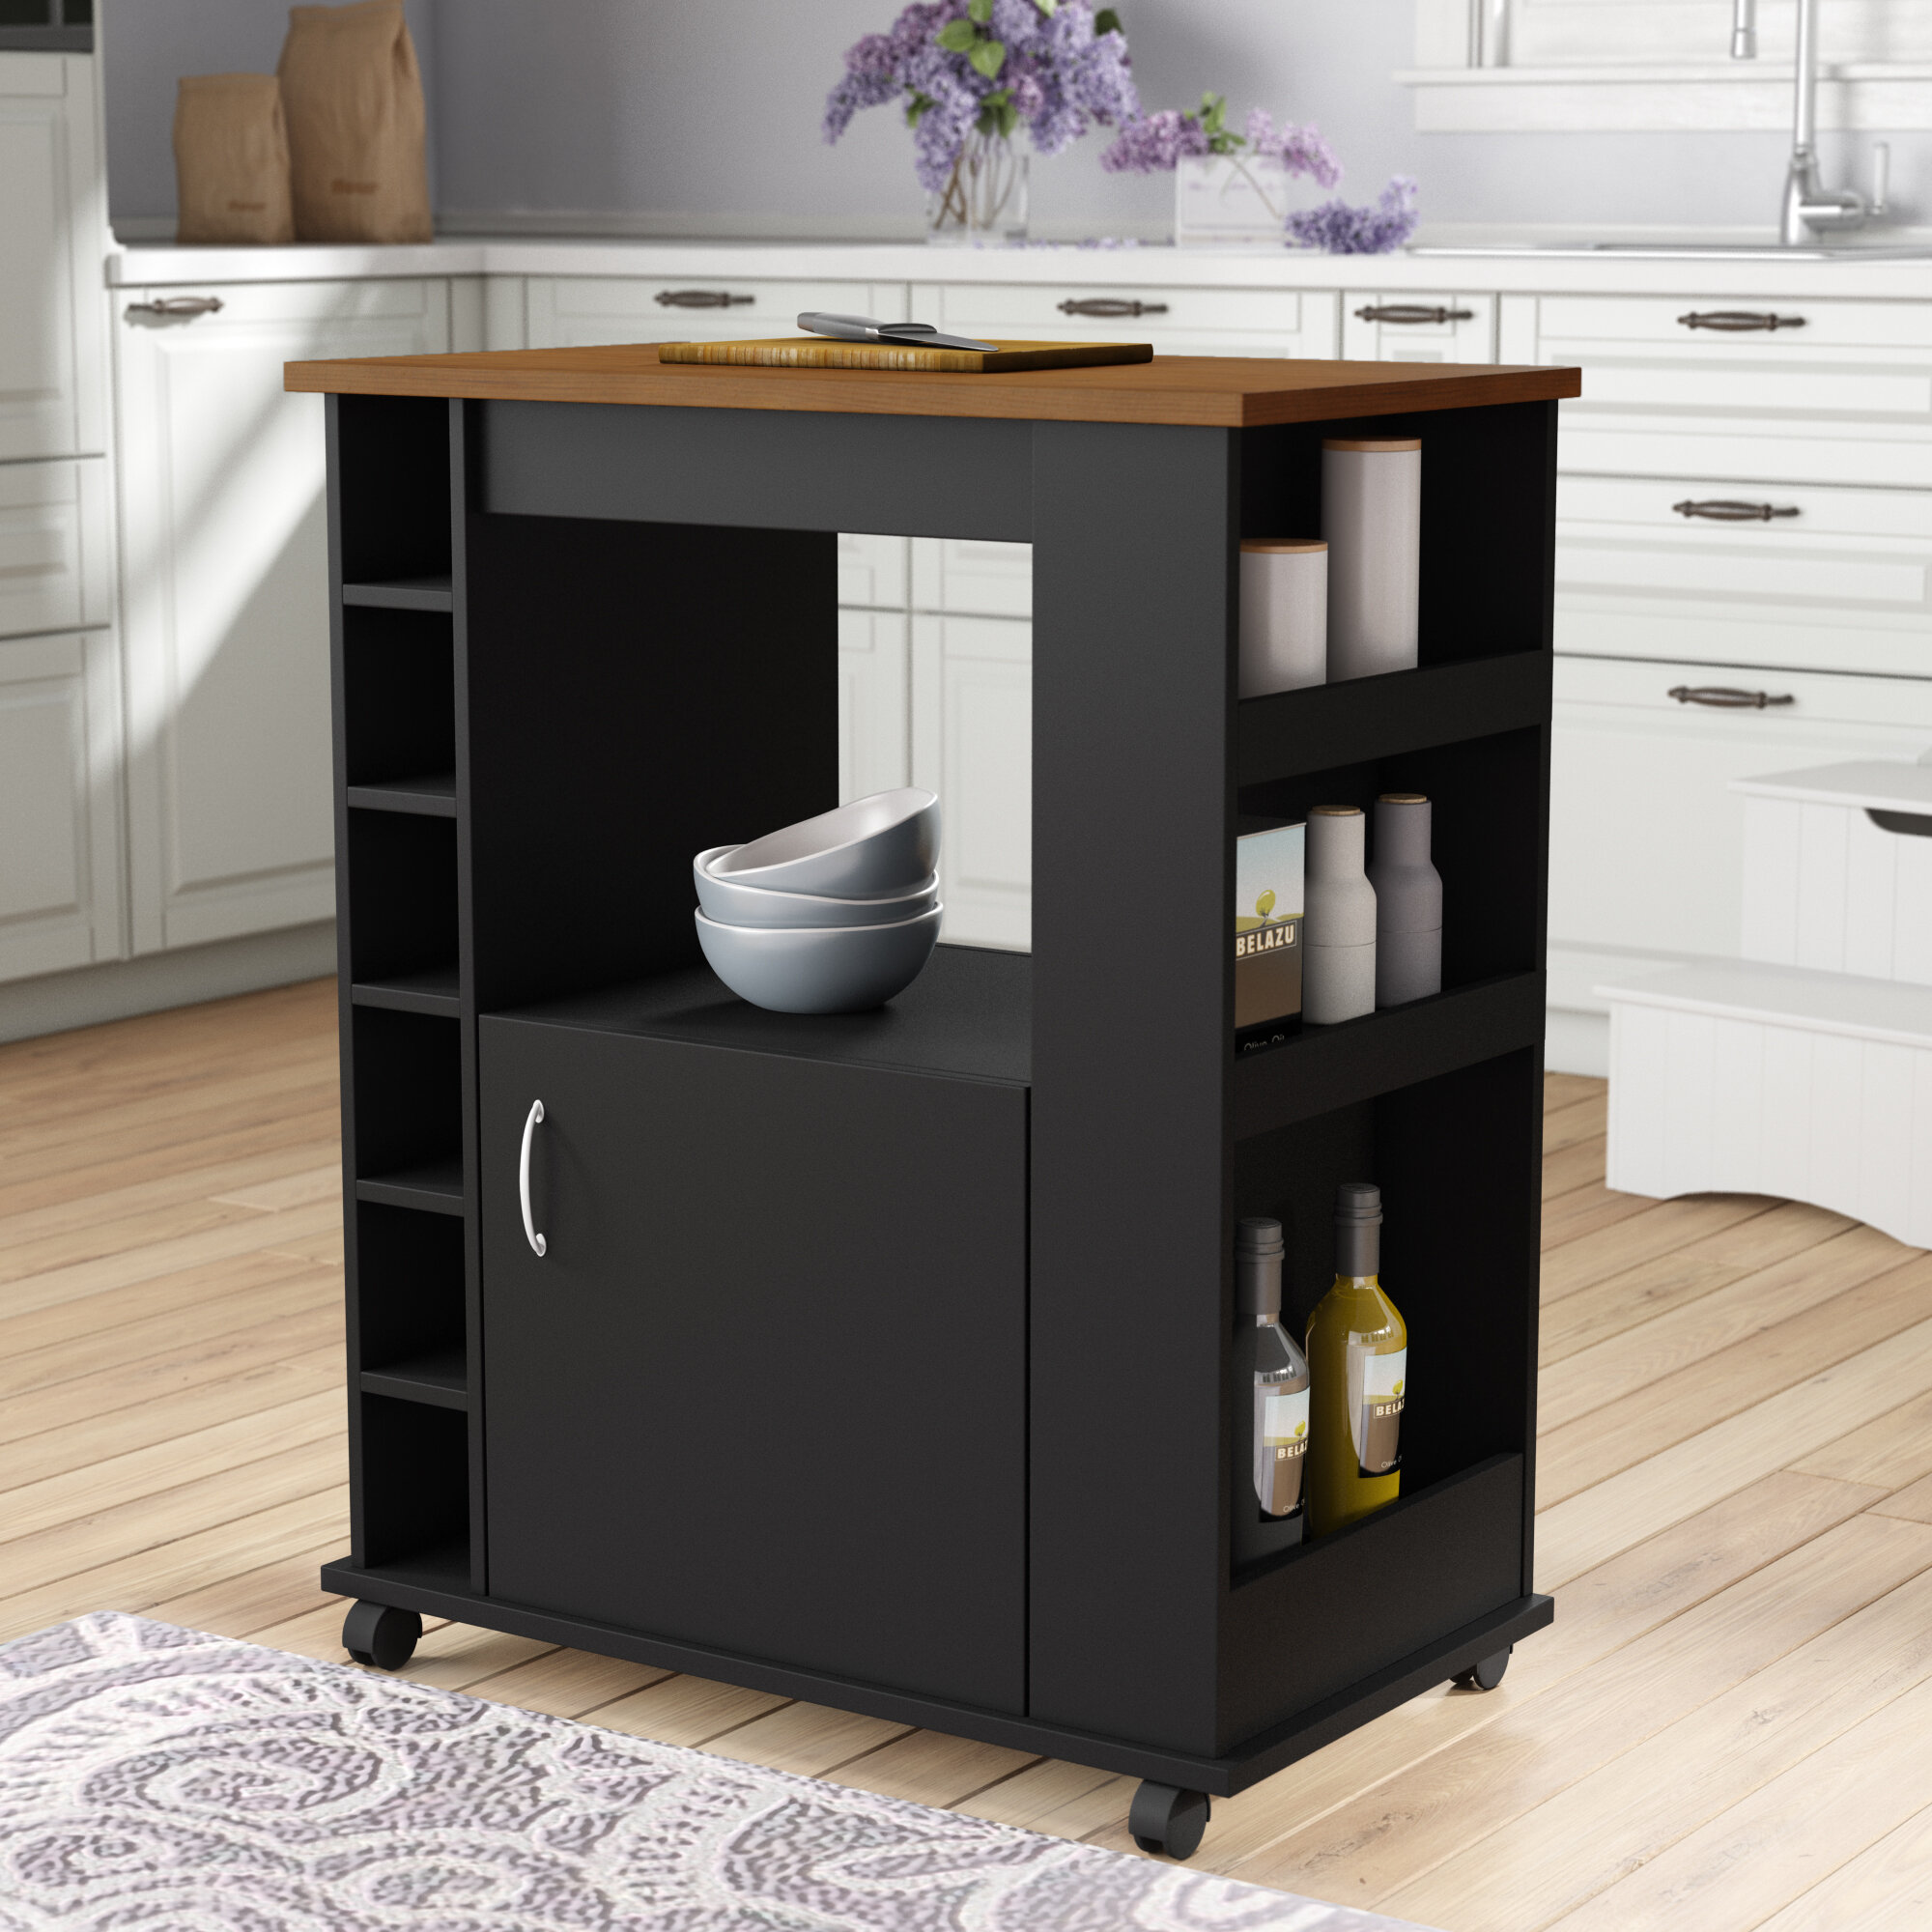 movable kitchen islands